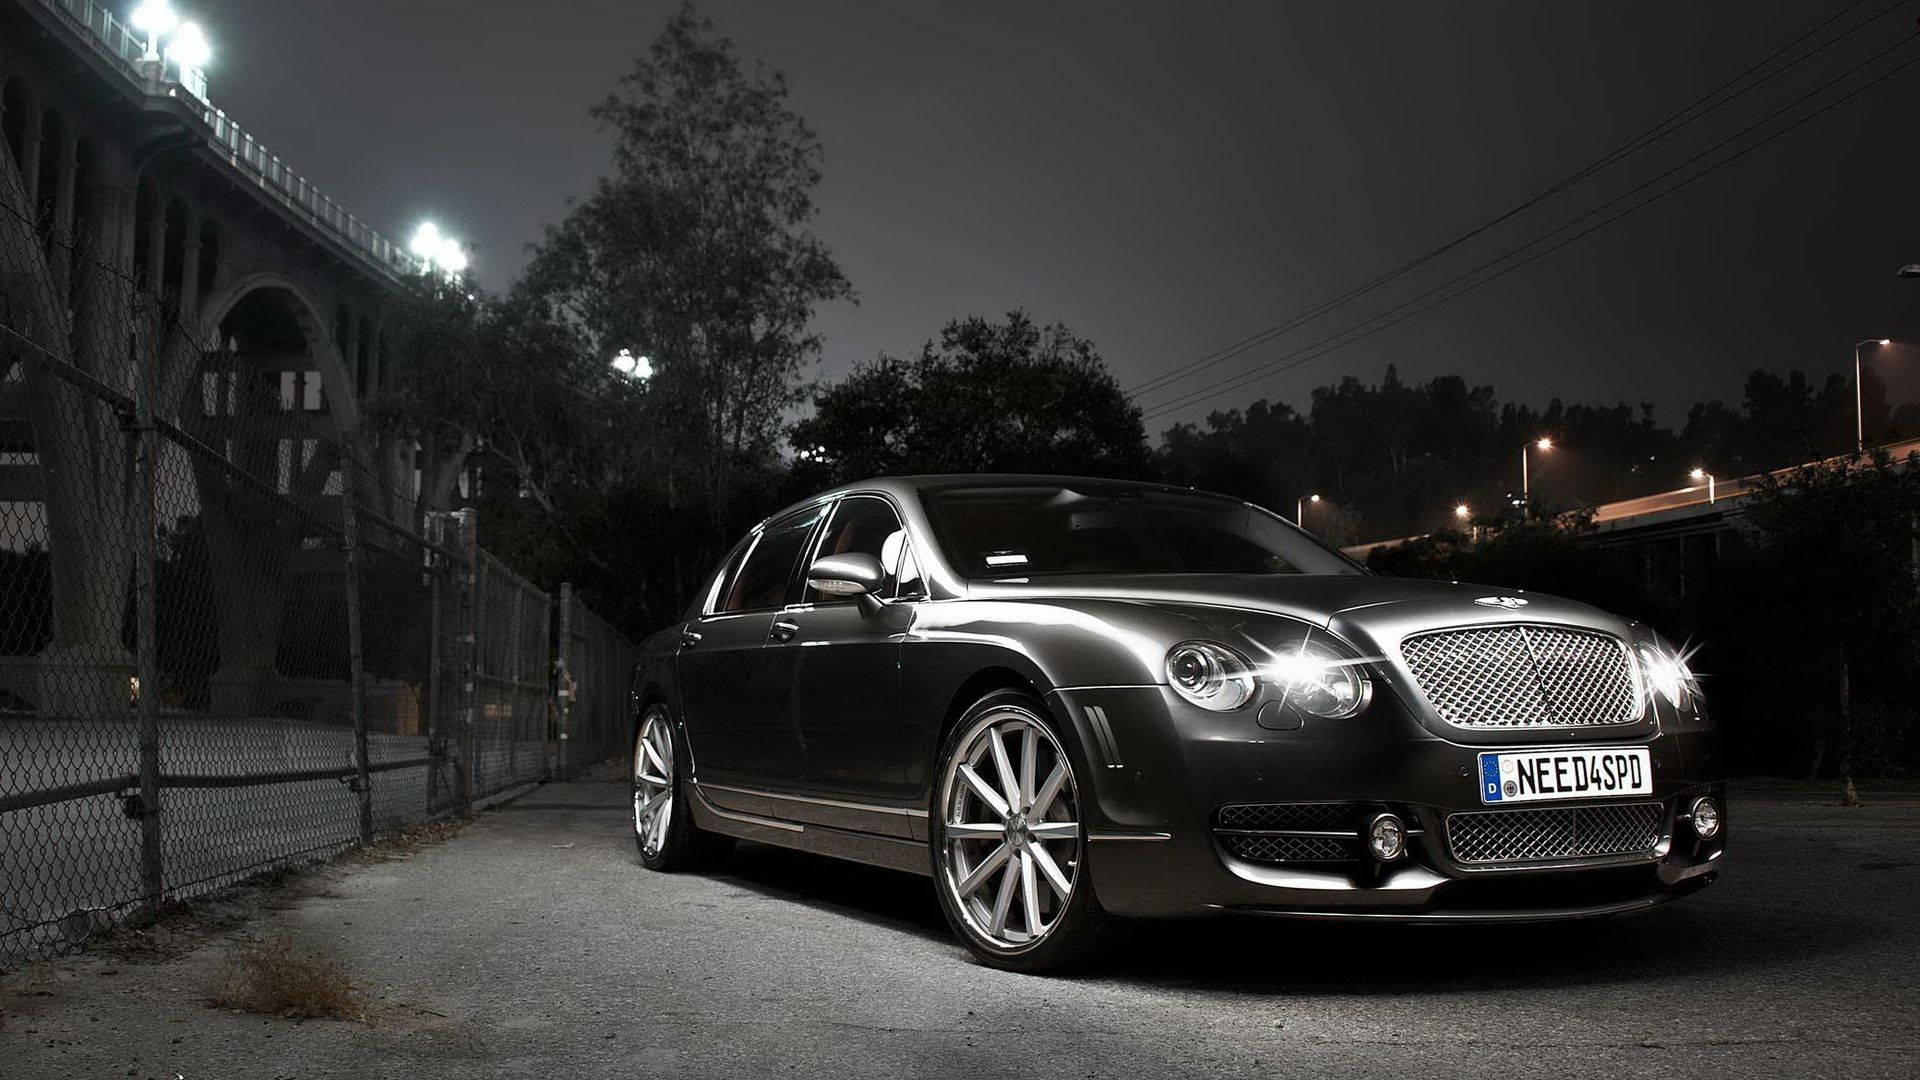 Luxury in Motion - The Bentley Grand Convertible Wallpaper